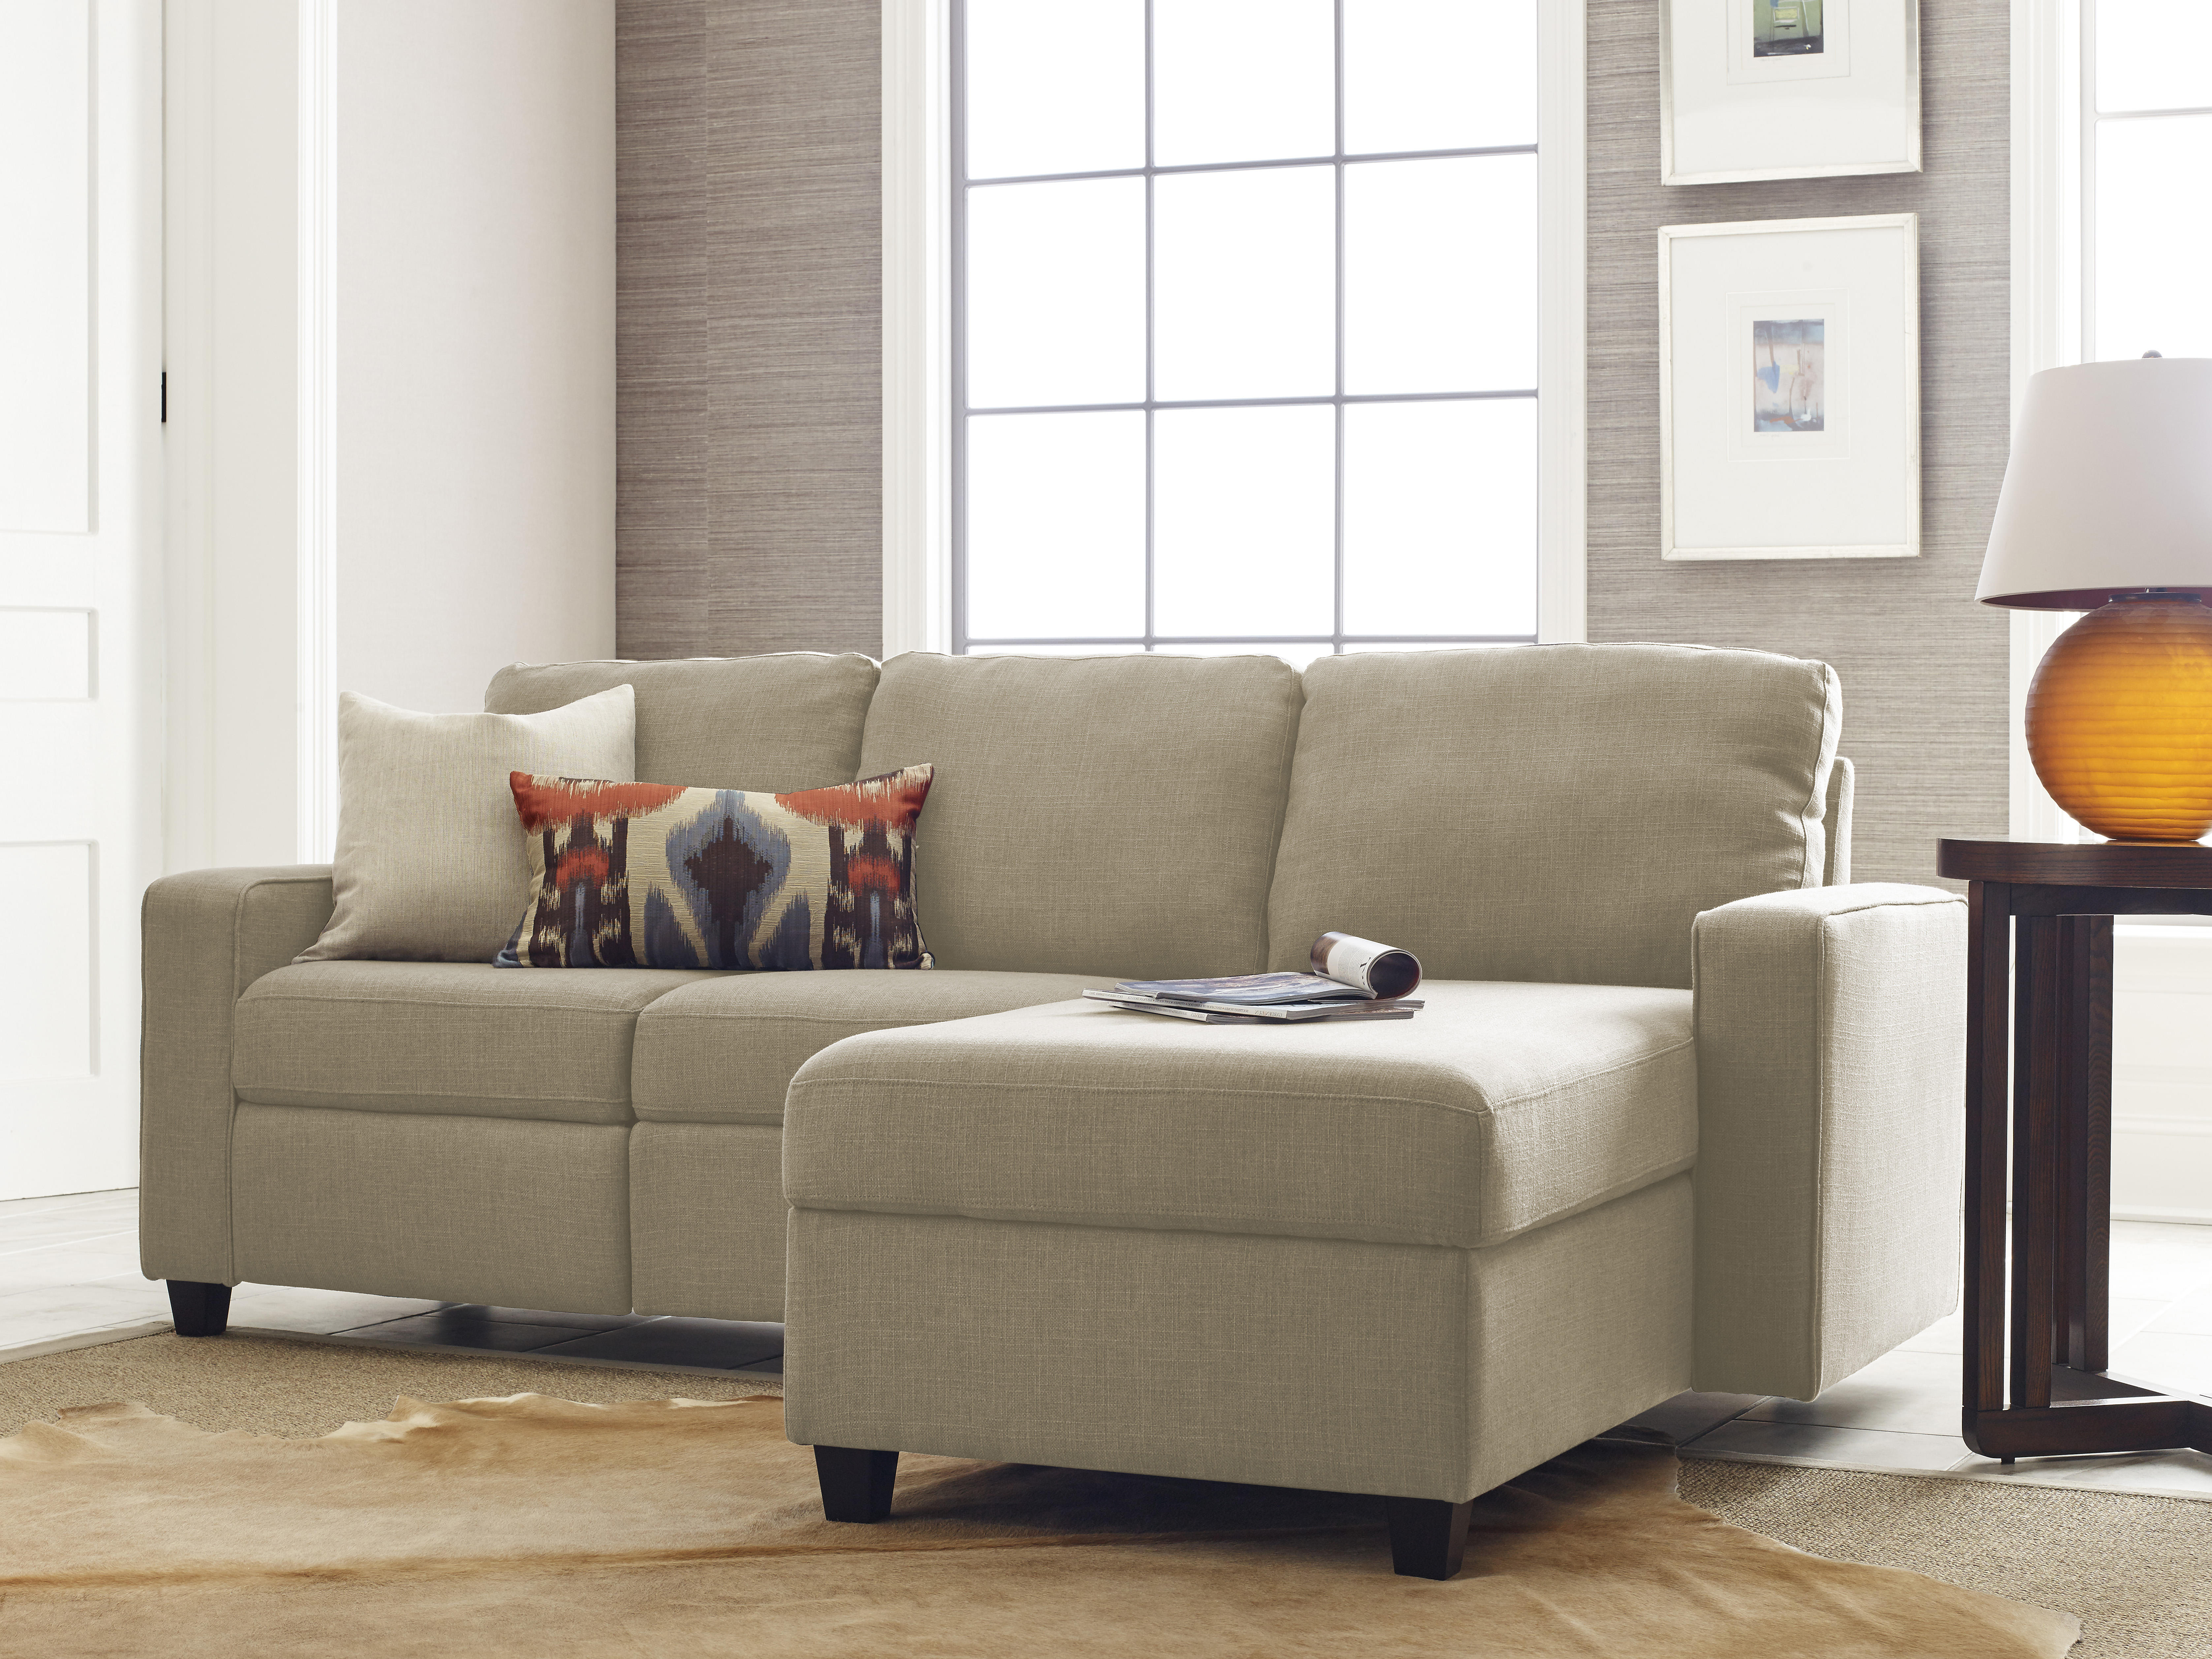 Serta Palisades Reclining Sectional with Right Storage Chaise - Oatmeal - image 3 of 9